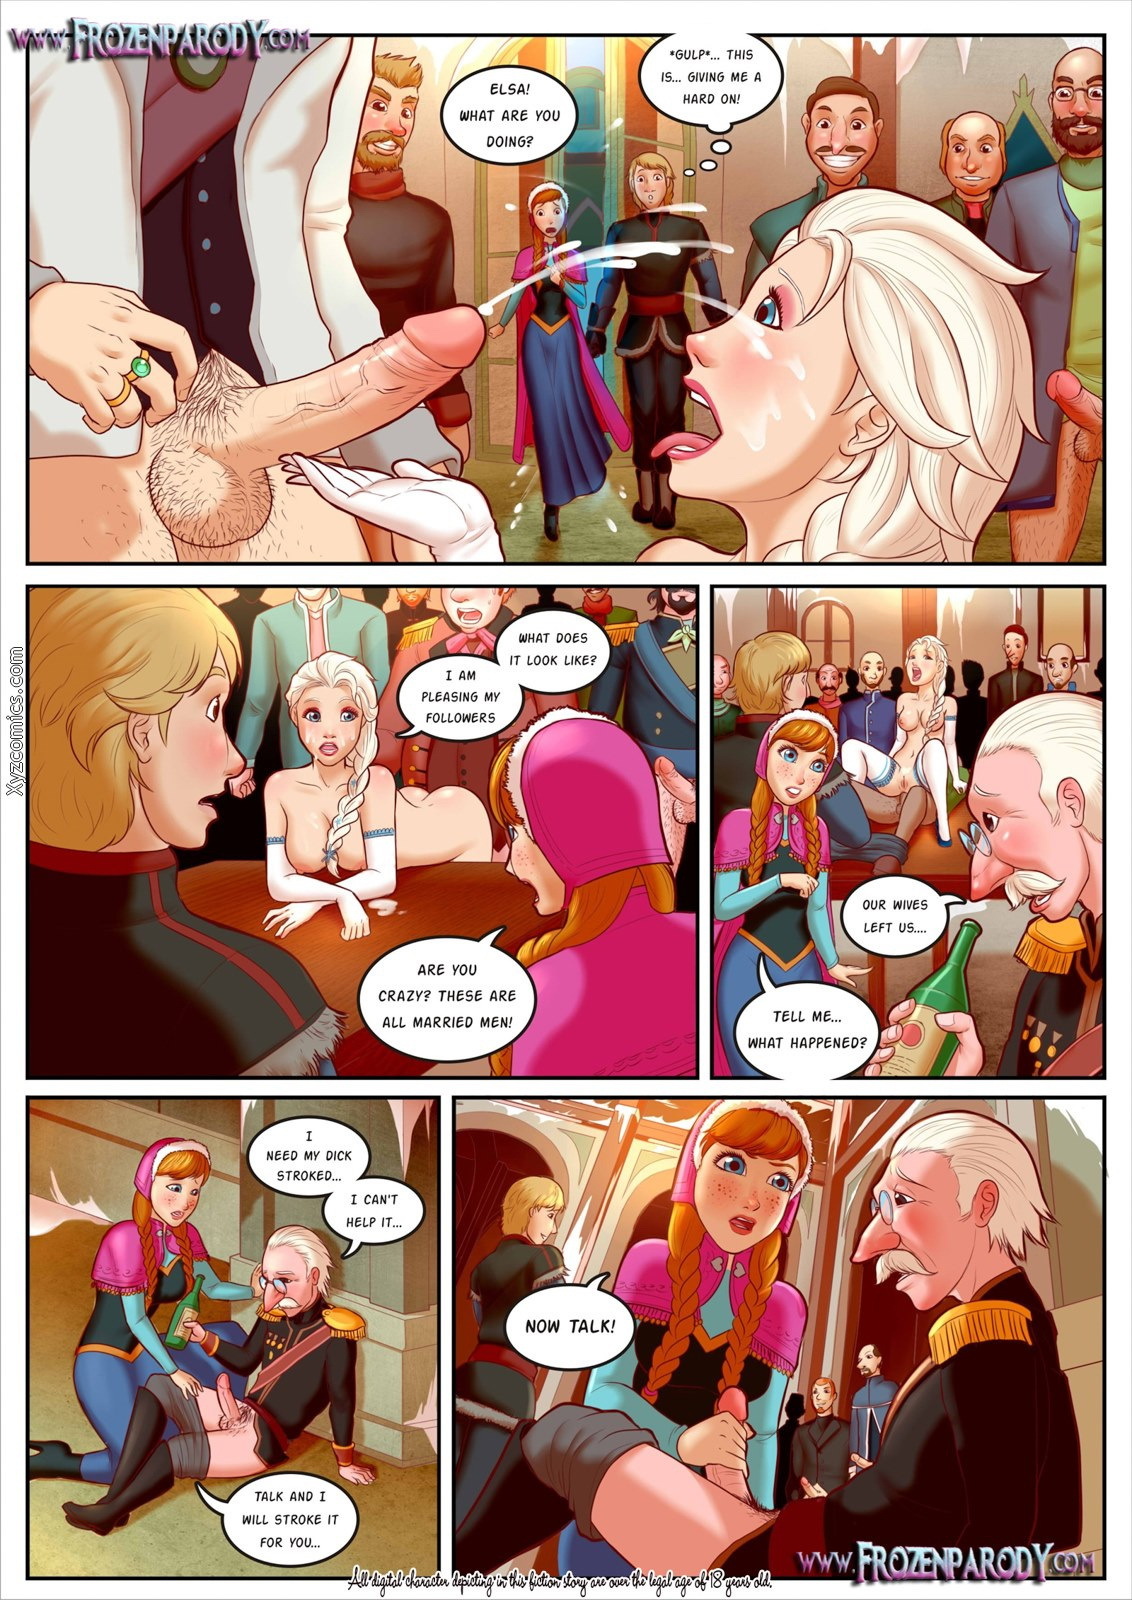 Frozen Parody 1, 2 - Page 4